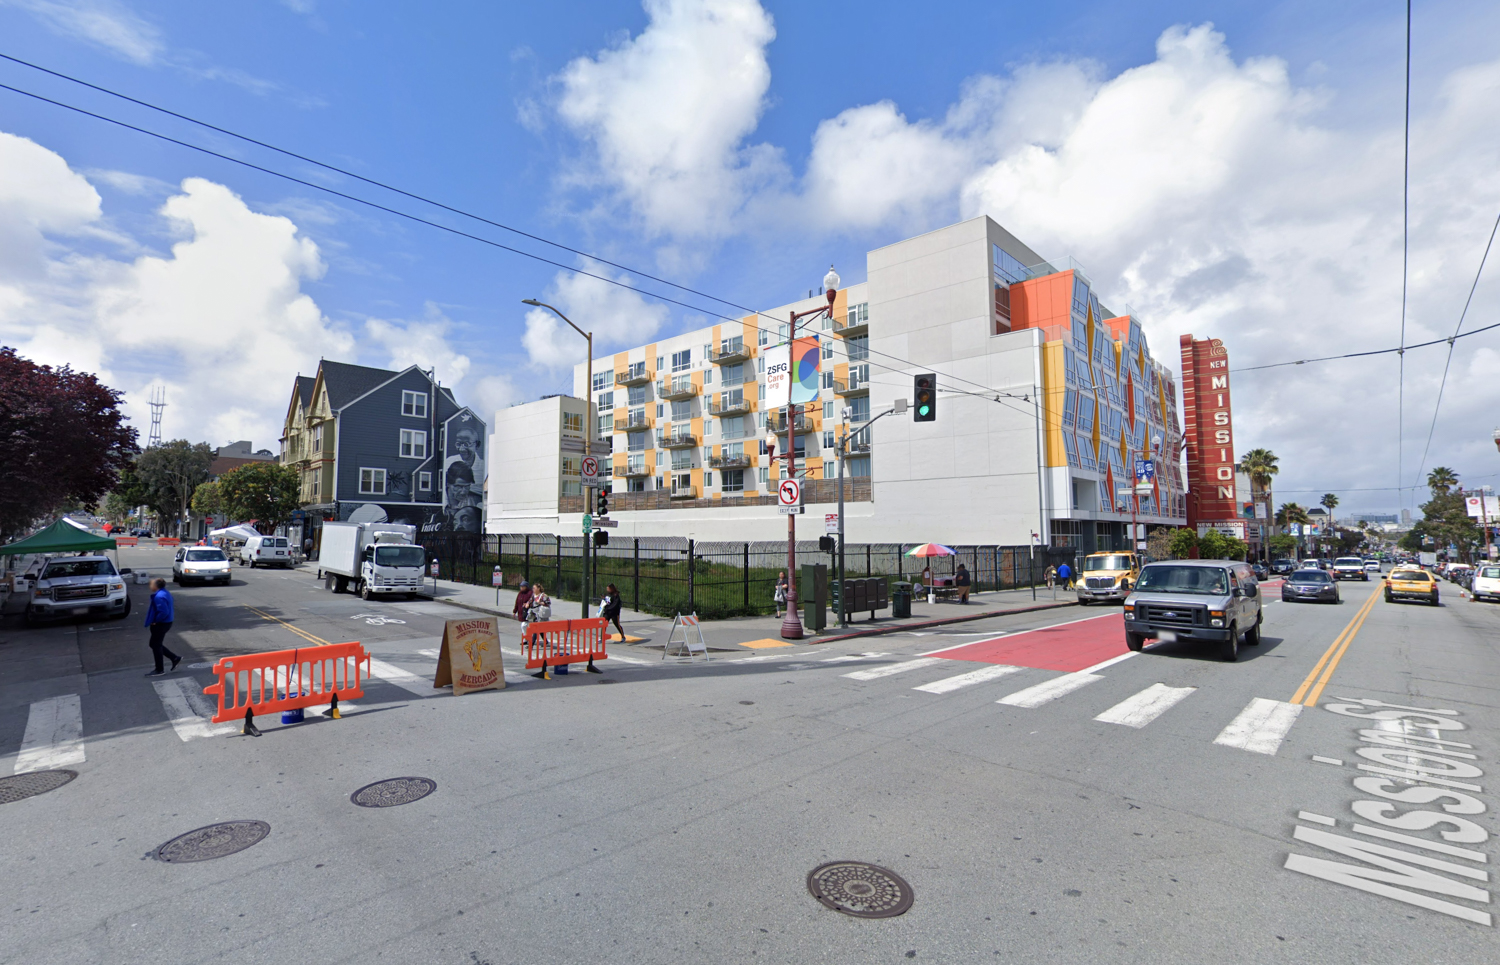 2588 Mission Street existing condition, image via Google Street View